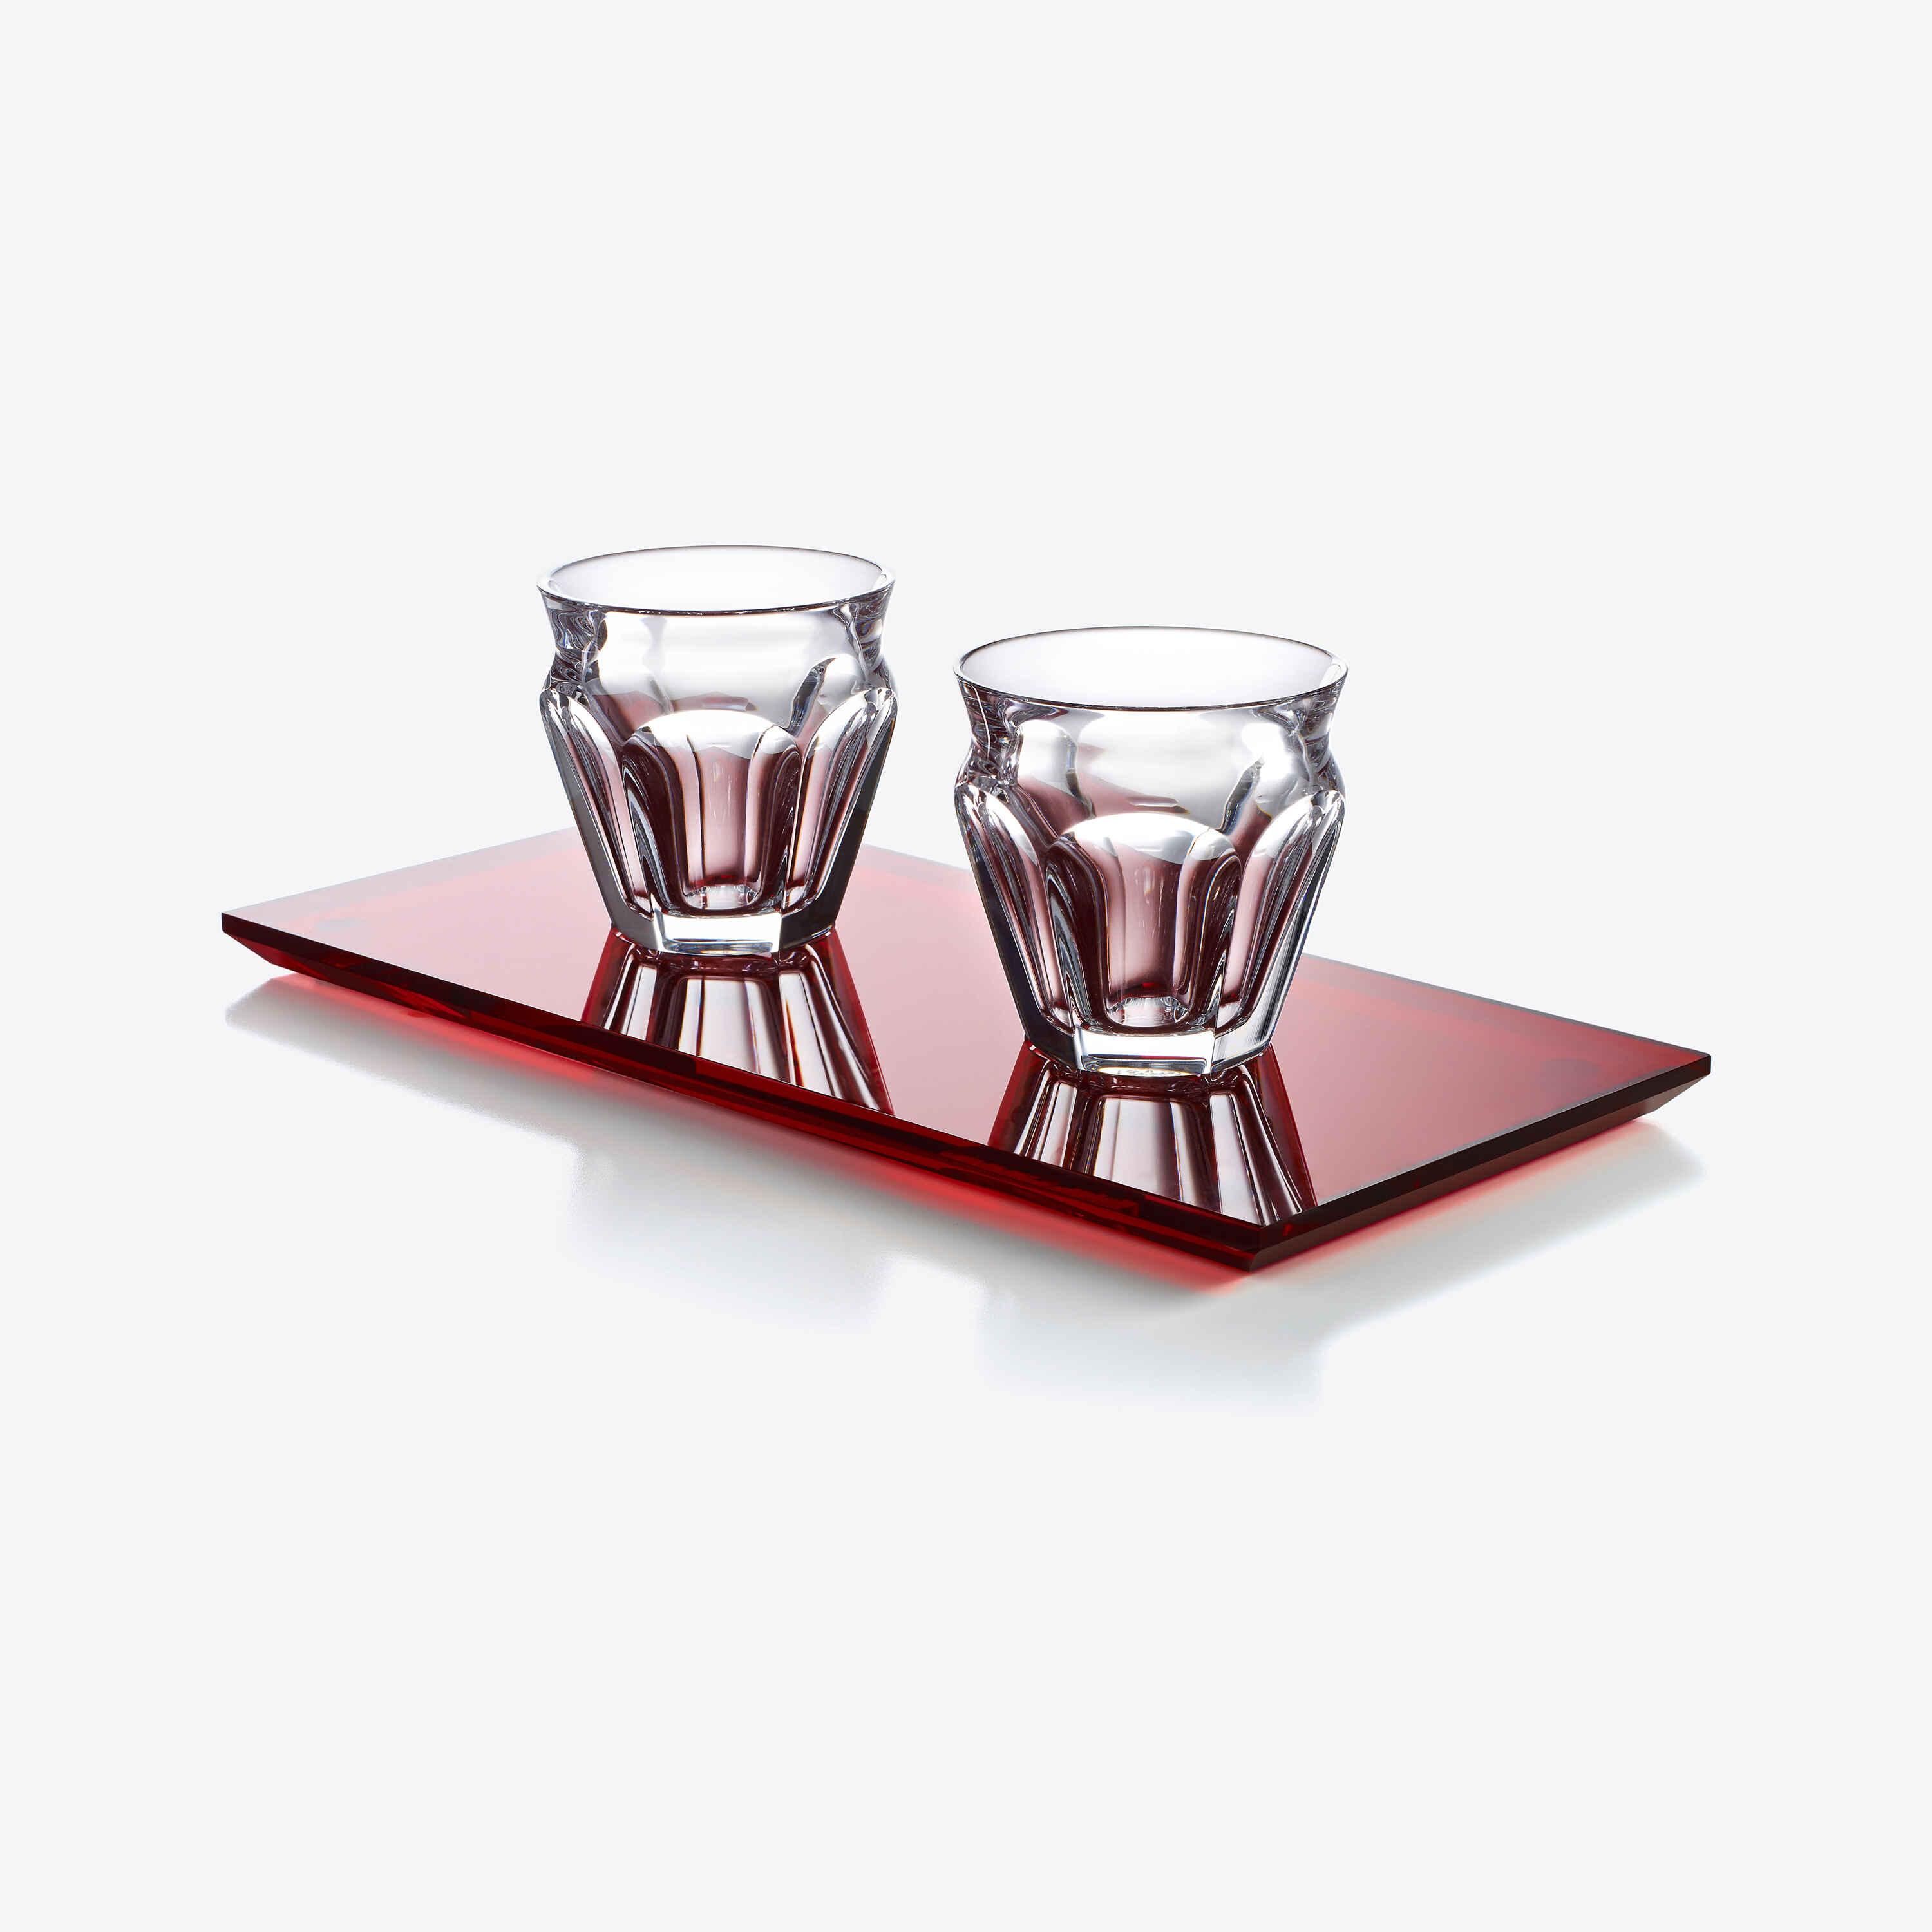 Shot glasses for coffee making (pair), Options.